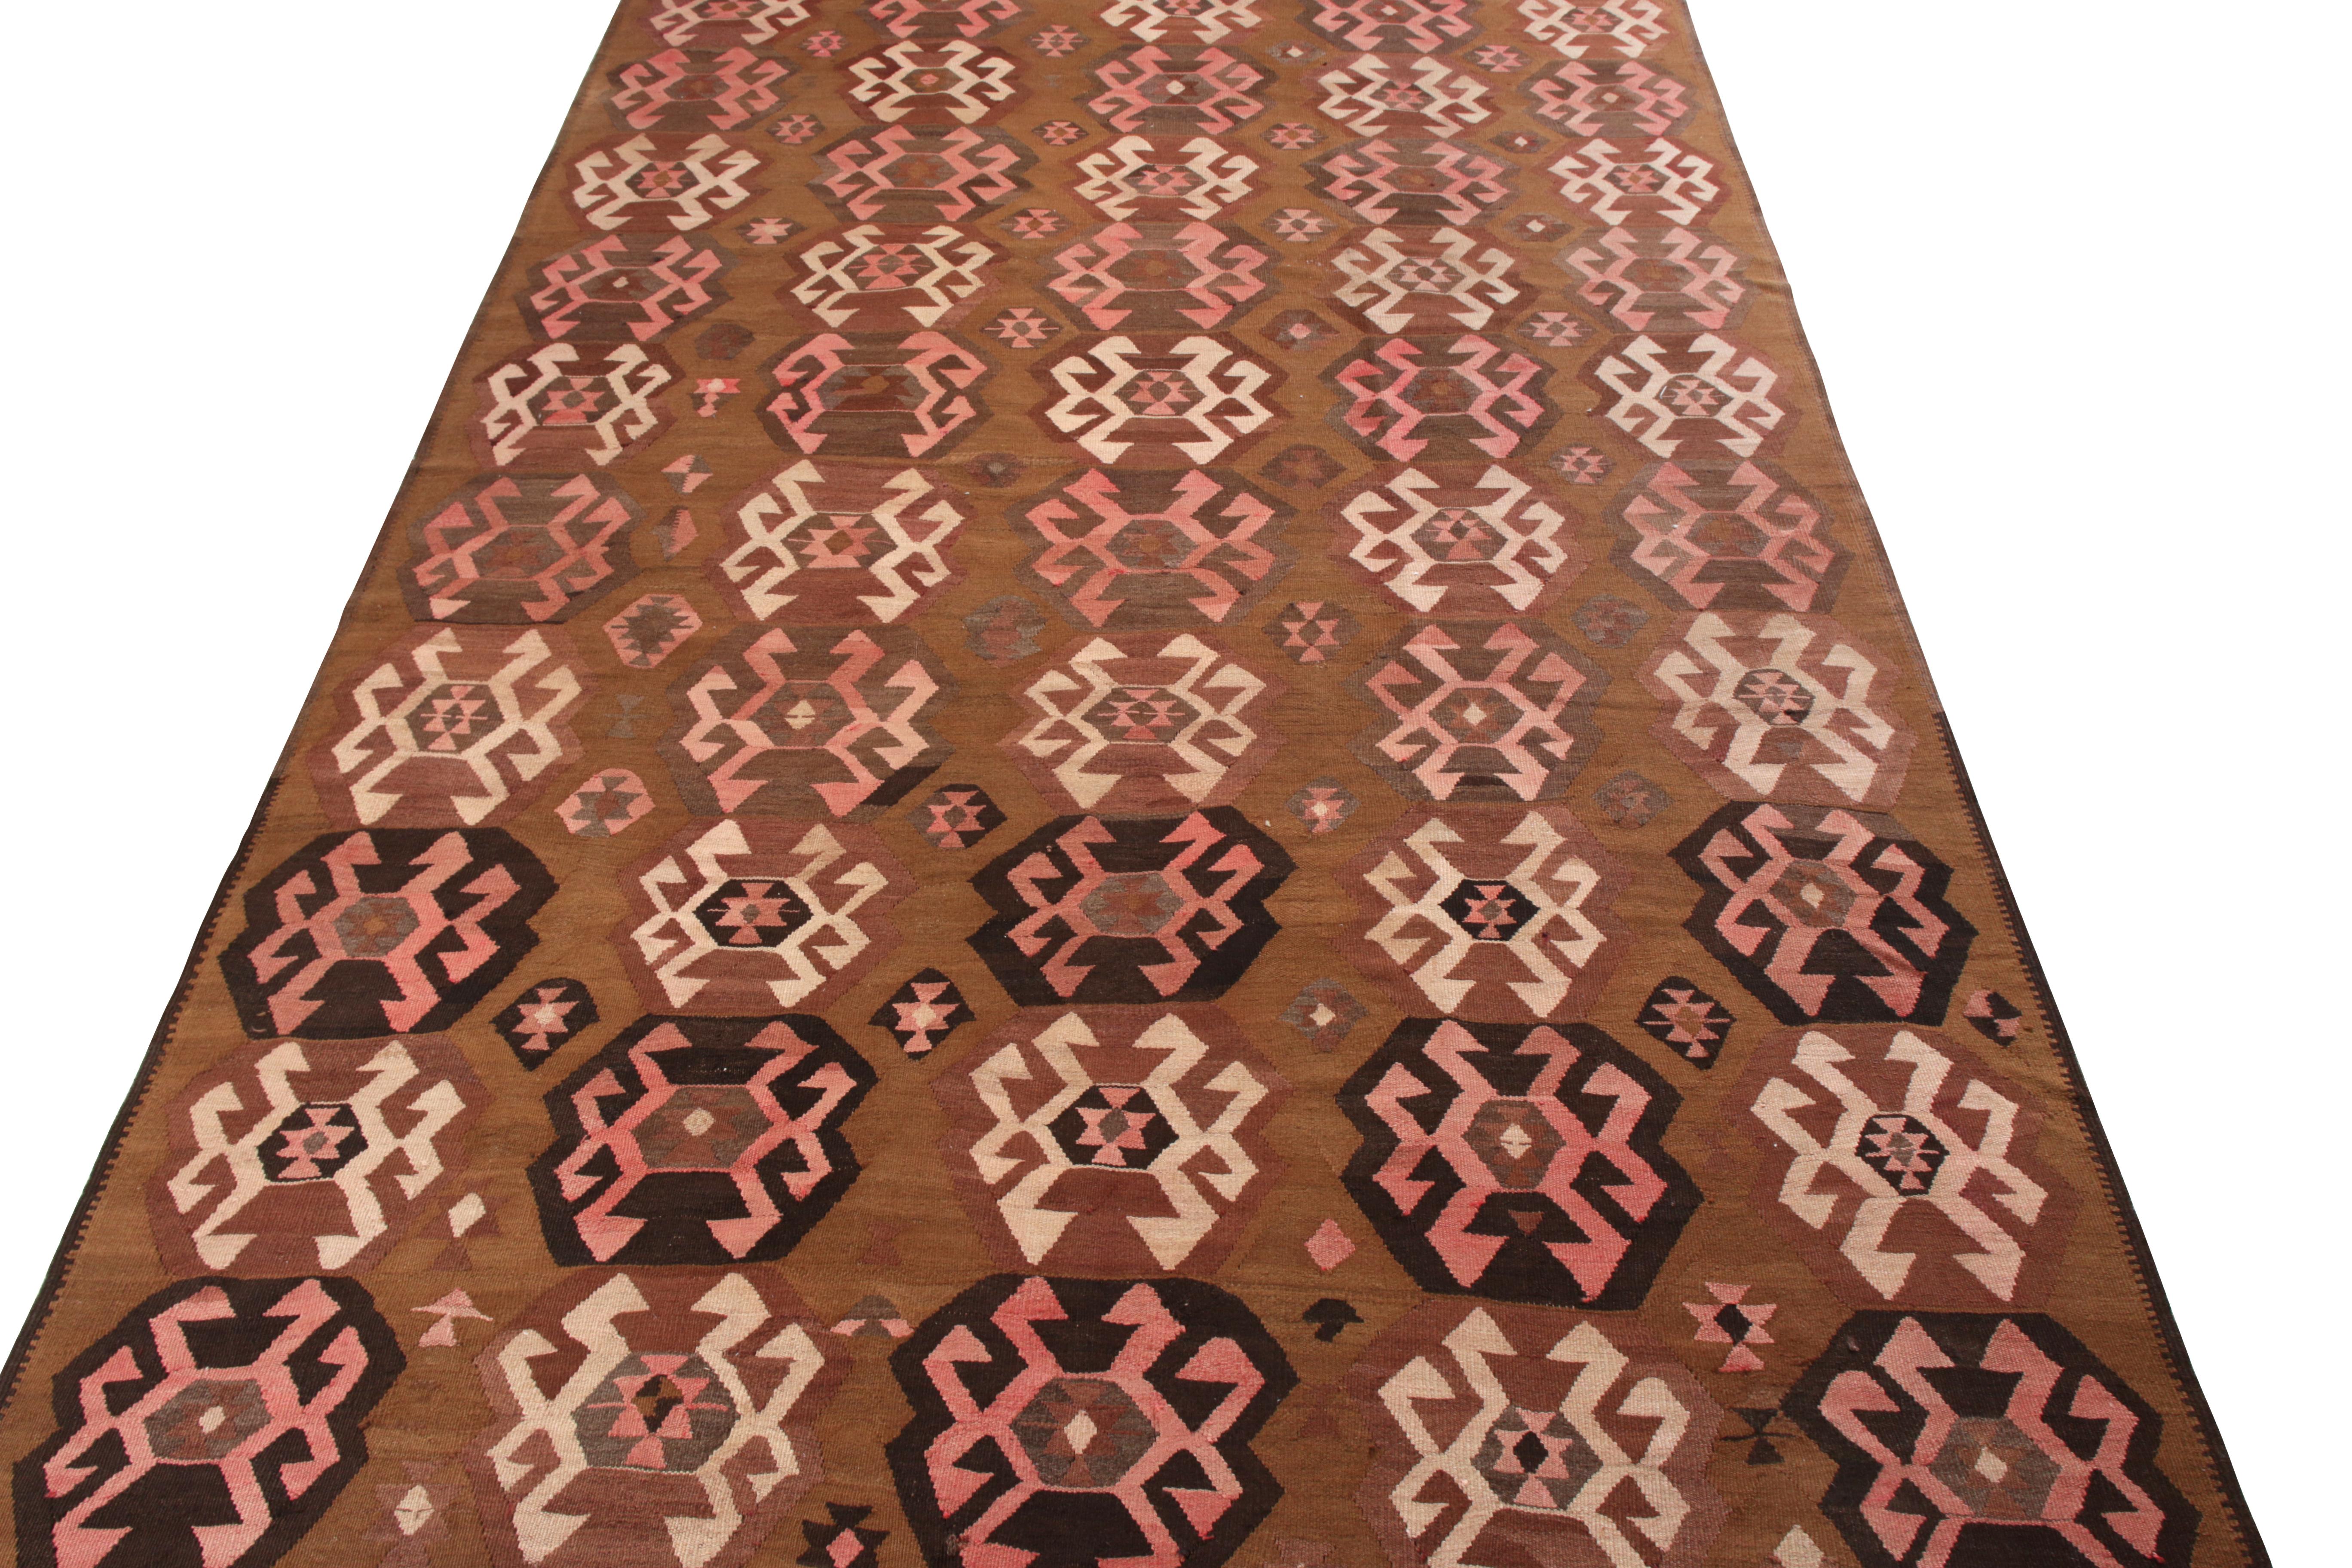 An 8 x 12 Kilim rug in the latest vintage selections from Rug & Kilim—handwoven in wool originating from Turkey circa 1950-1960. Enjoying an all over geometric pattern with an exceptional sense of movement, this particular transitional style